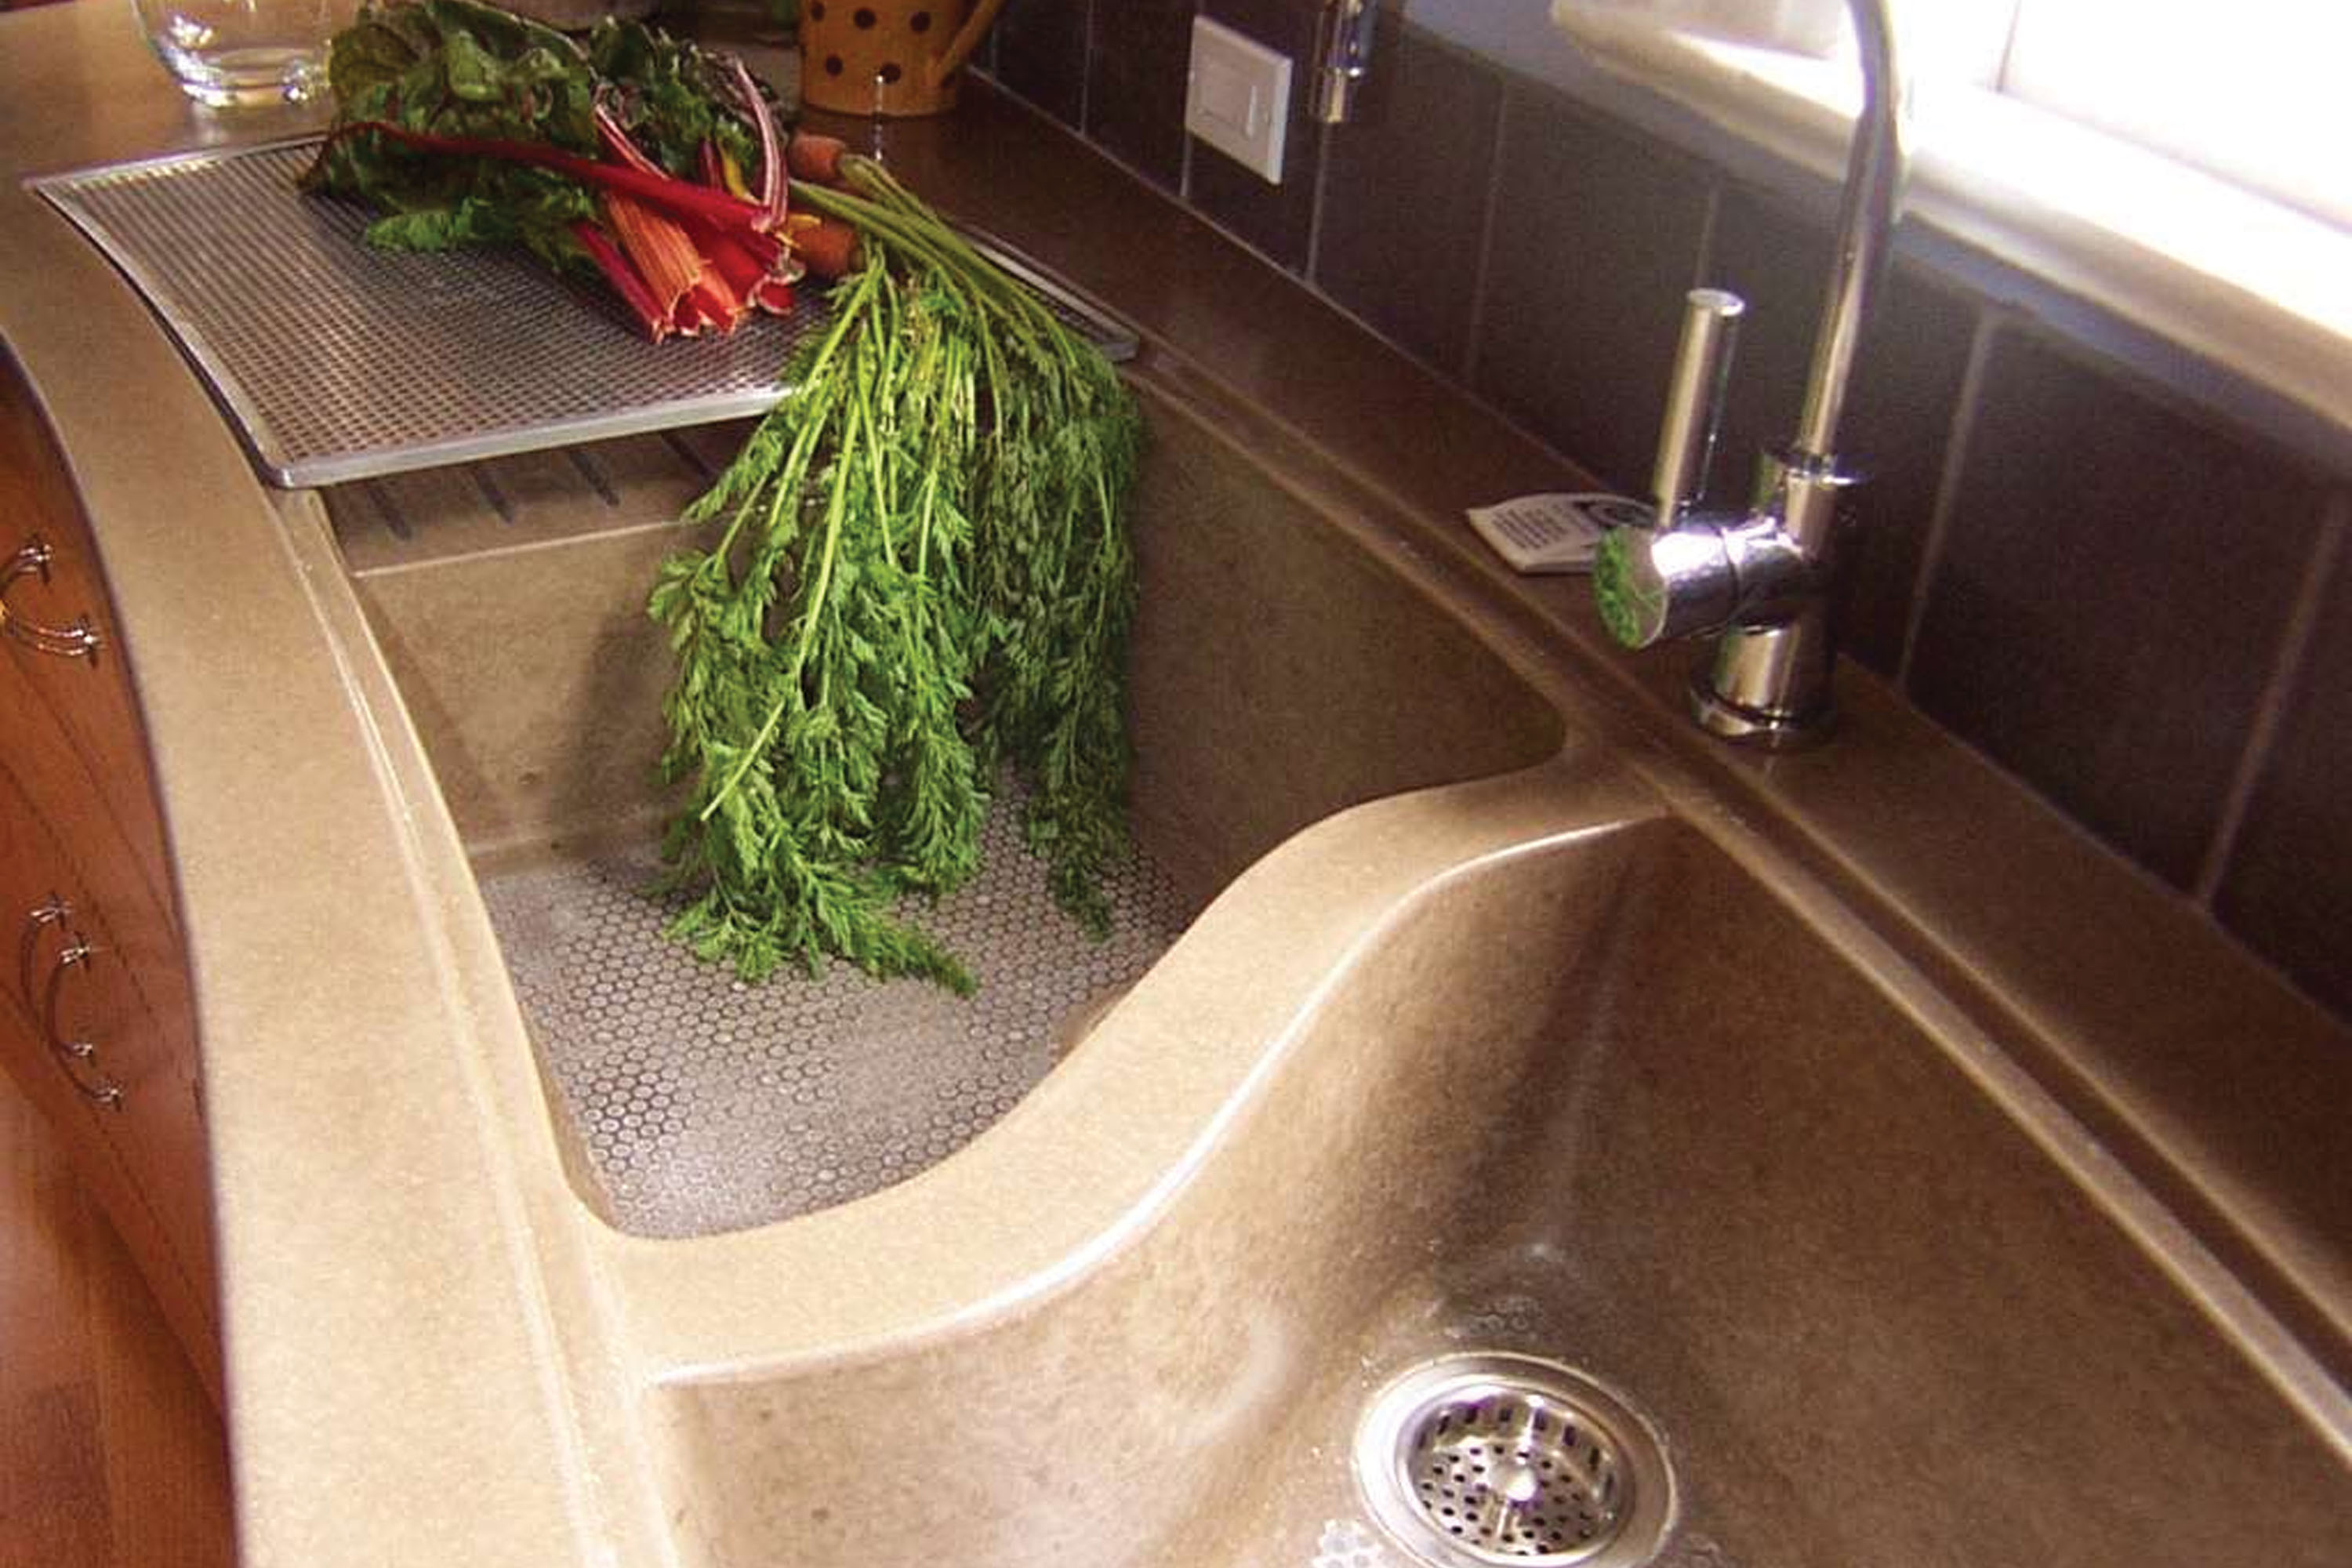 Concrete ChefSink, N606 Thyme